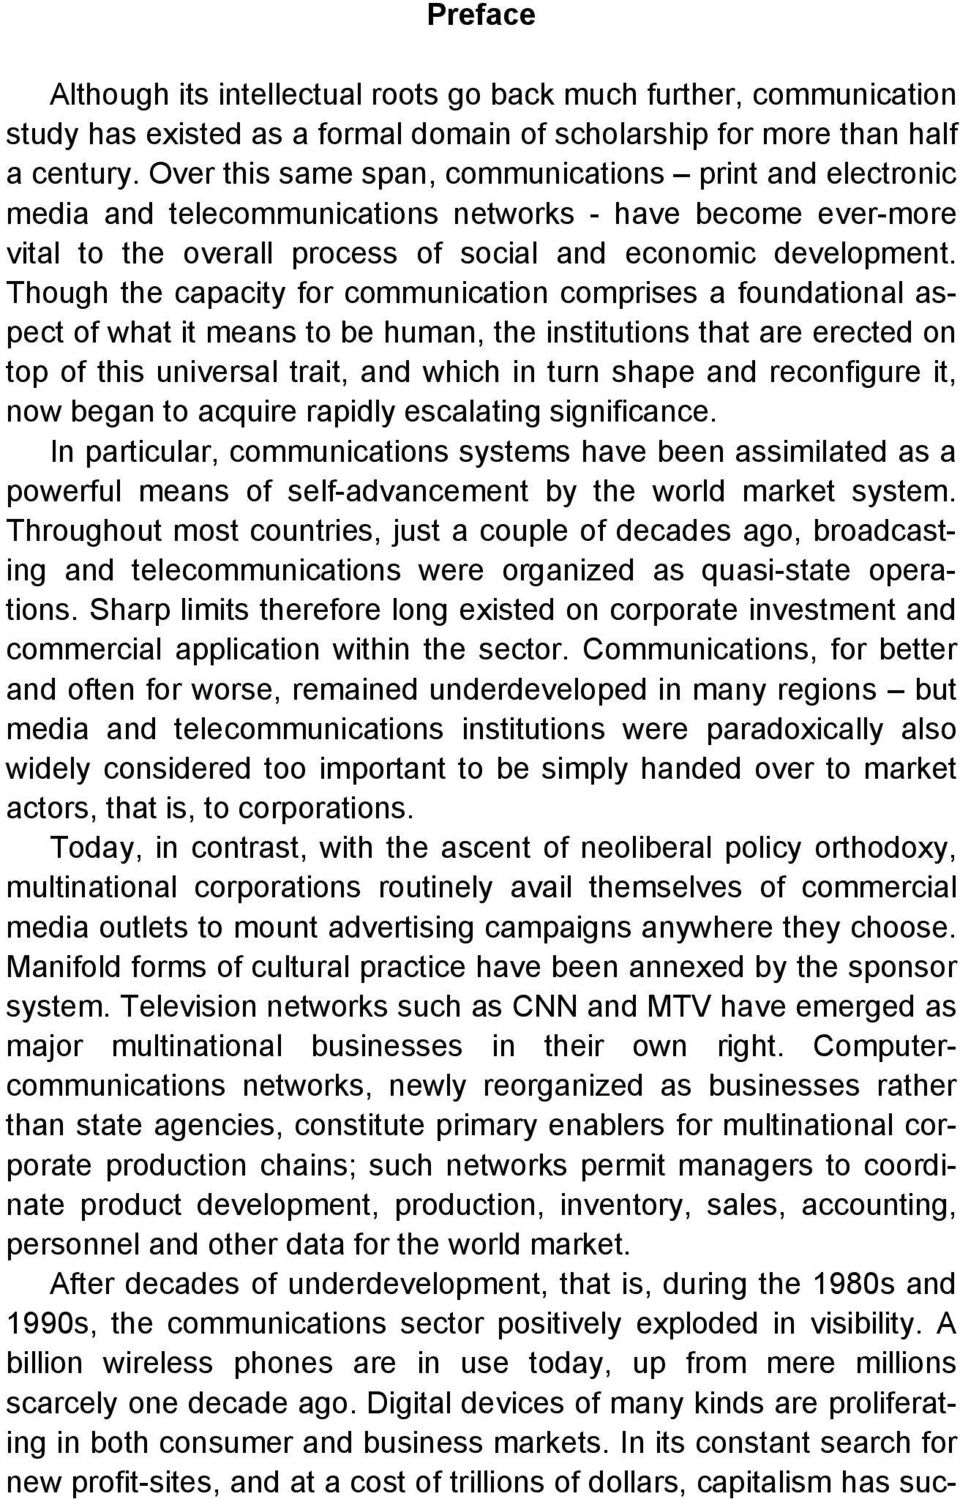 Though the capacity for communication comprises a foundational aspect of what it means to be human, the institutions that are erected on top of this universal trait, and which in turn shape and